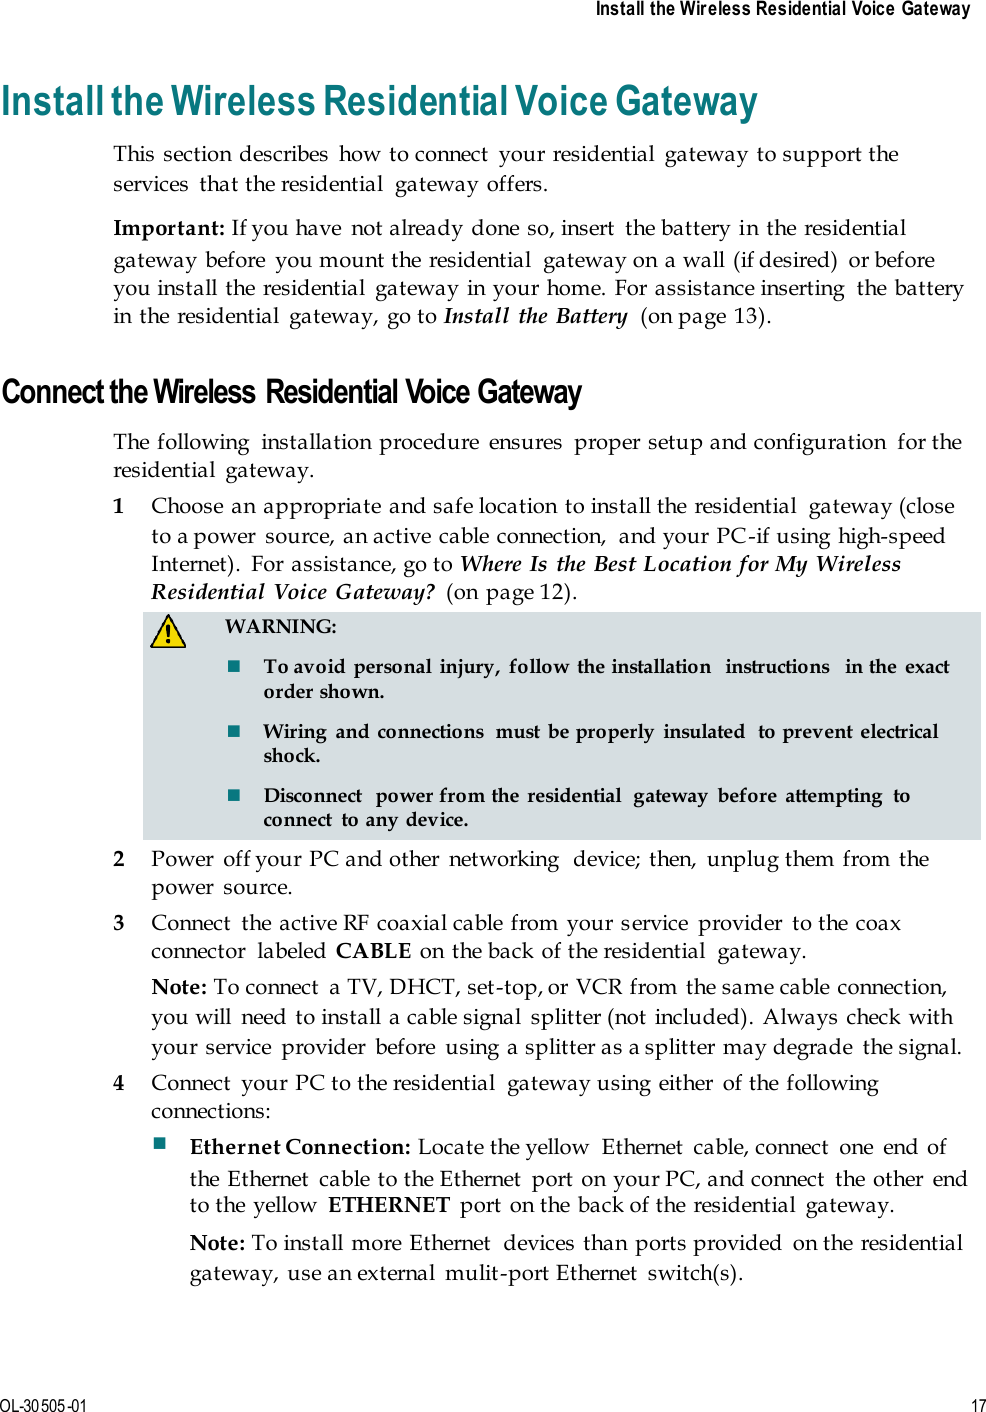     Install the Wireless Residential Voice Gateway   OL-30505-01 17  Install the Wireless Residential Voice Gateway This  section describes  how to connect  your residential  gateway to support the services  that the residential  gateway offers.   Important: If you have  not already done so, insert  the battery in  the residential gateway before  you mount the residential  gateway on  a wall (if desired)  or before you install the  residential  gateway in your home. For  assistance inserting  the battery in the residential  gateway, go to Install the Battery  (on page 13).   Connect the Wireless Residential Voice Gateway The  following  installation procedure  ensures  proper setup and configuration  for the residential  gateway. 1 Choose an  appropriate and safe location  to install the residential  gateway (close to a power  source, an active cable connection,  and your PC-if using high-speed Internet).  For  assistance, go to Where Is the Best Location for  My Wireless Residential  Voice Gateway?  (on page 12).   WARNING:  To avoid  personal  injury,  follow  the installation  instructions  in the  exact order shown.  Wiring  and  connections  must  be properly  insulated  to prevent  electrical shock.  Disconnect  power from the  residential  gateway  before  attempting  to connect  to any device. 2 Power  off your PC and other  networking  device;  then,  unplug them from  the power  source. 3 Connect  the active RF coaxial cable from your service  provider  to the  coax connector  labeled  CABLE on the back of the residential  gateway. Note: To connect  a TV, DHCT, set-top, or  VCR from the same cable connection, you will  need to install a cable signal  splitter (not  included). Always check with your service  provider  before  using a splitter as a splitter may degrade  the signal. 4 Connect  your PC to the residential  gateway using either  of the following connections:  Ethernet Connection: Locate the yellow  Ethernet  cable, connect  one  end of the Ethernet  cable  to the Ethernet  port on your PC, and connect  the other  end to the  yellow  ETHERNET  port  on the back of the  residential  gateway. Note: To install more Ethernet  devices than ports provided  on the  residential gateway, use an external  mulit-port Ethernet  switch(s). 